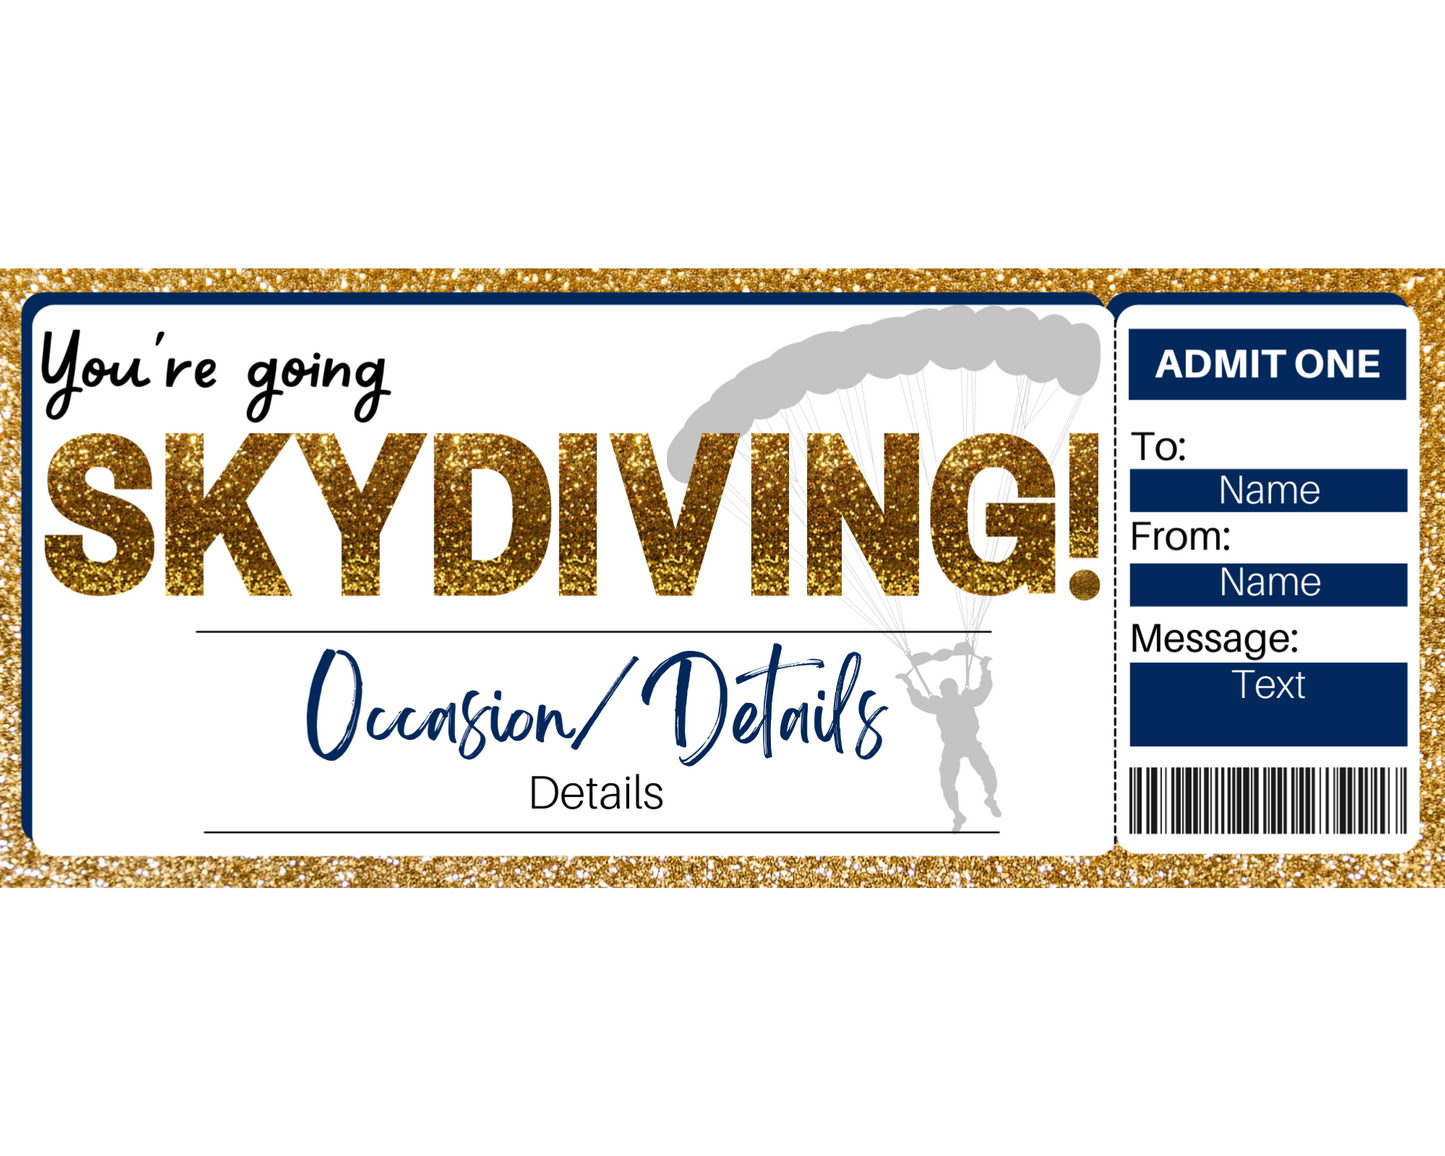 Skydiving Gift Ticket Template